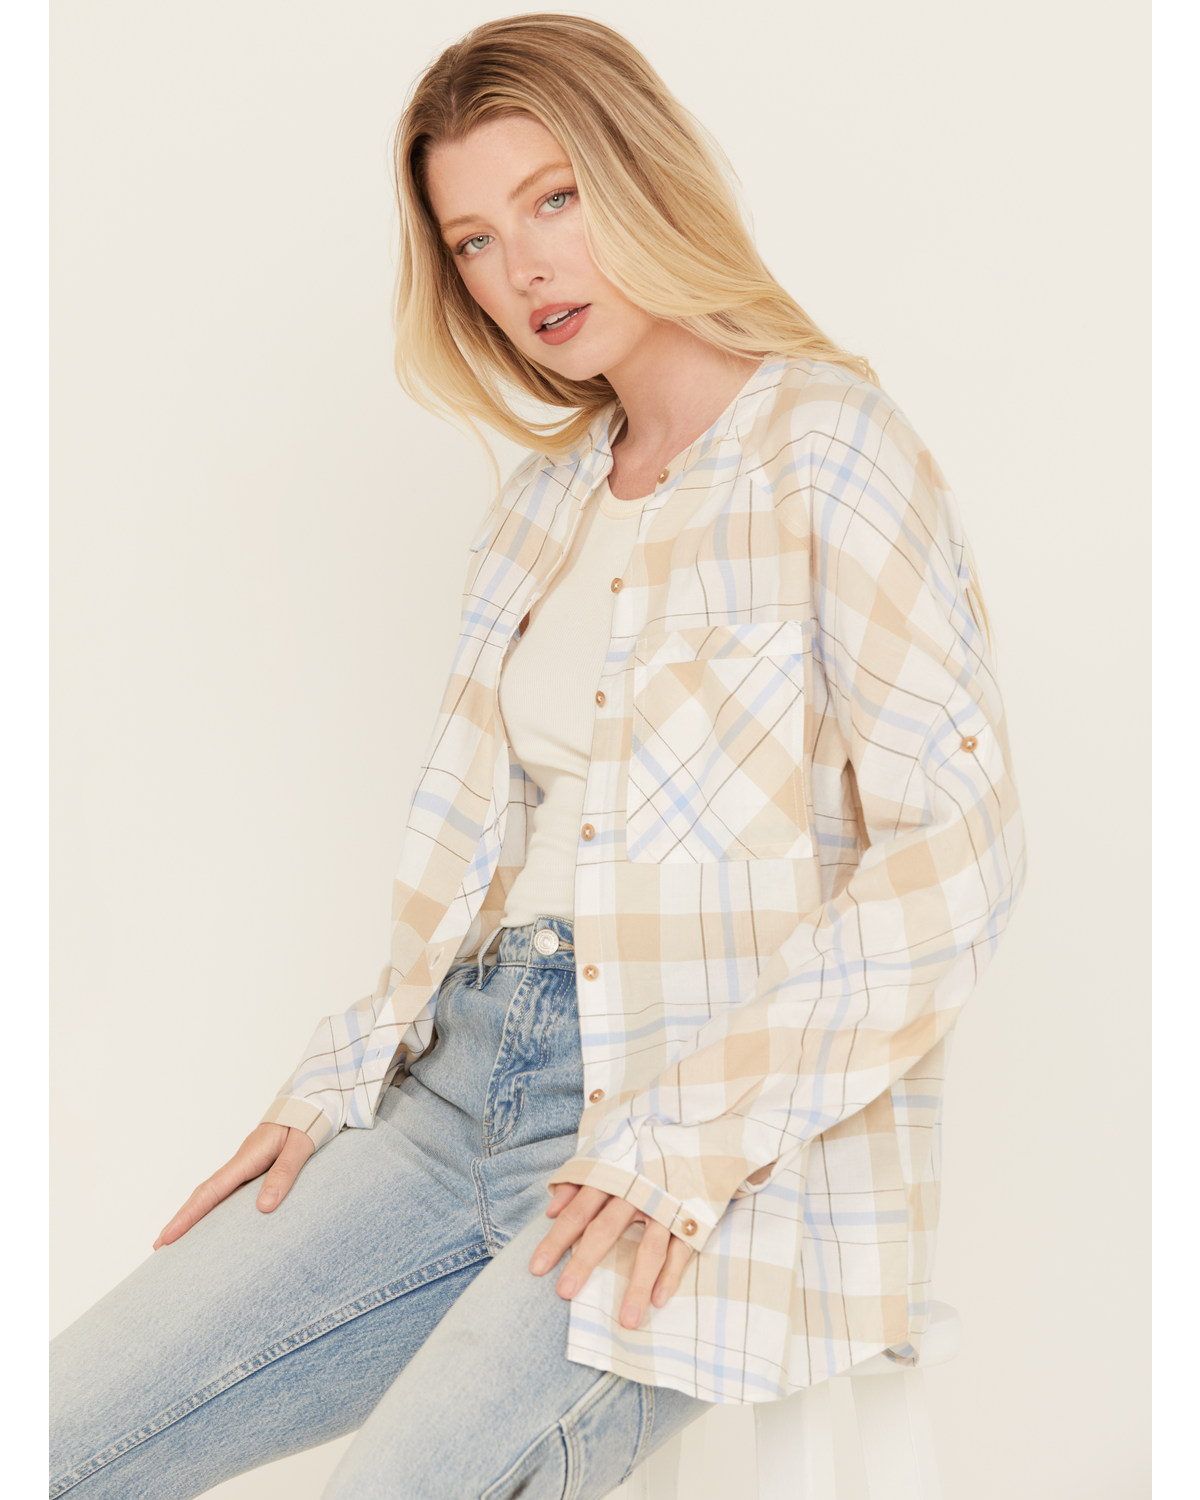 Cleo + Wolf Women's Oversized Plaid Print Button Up